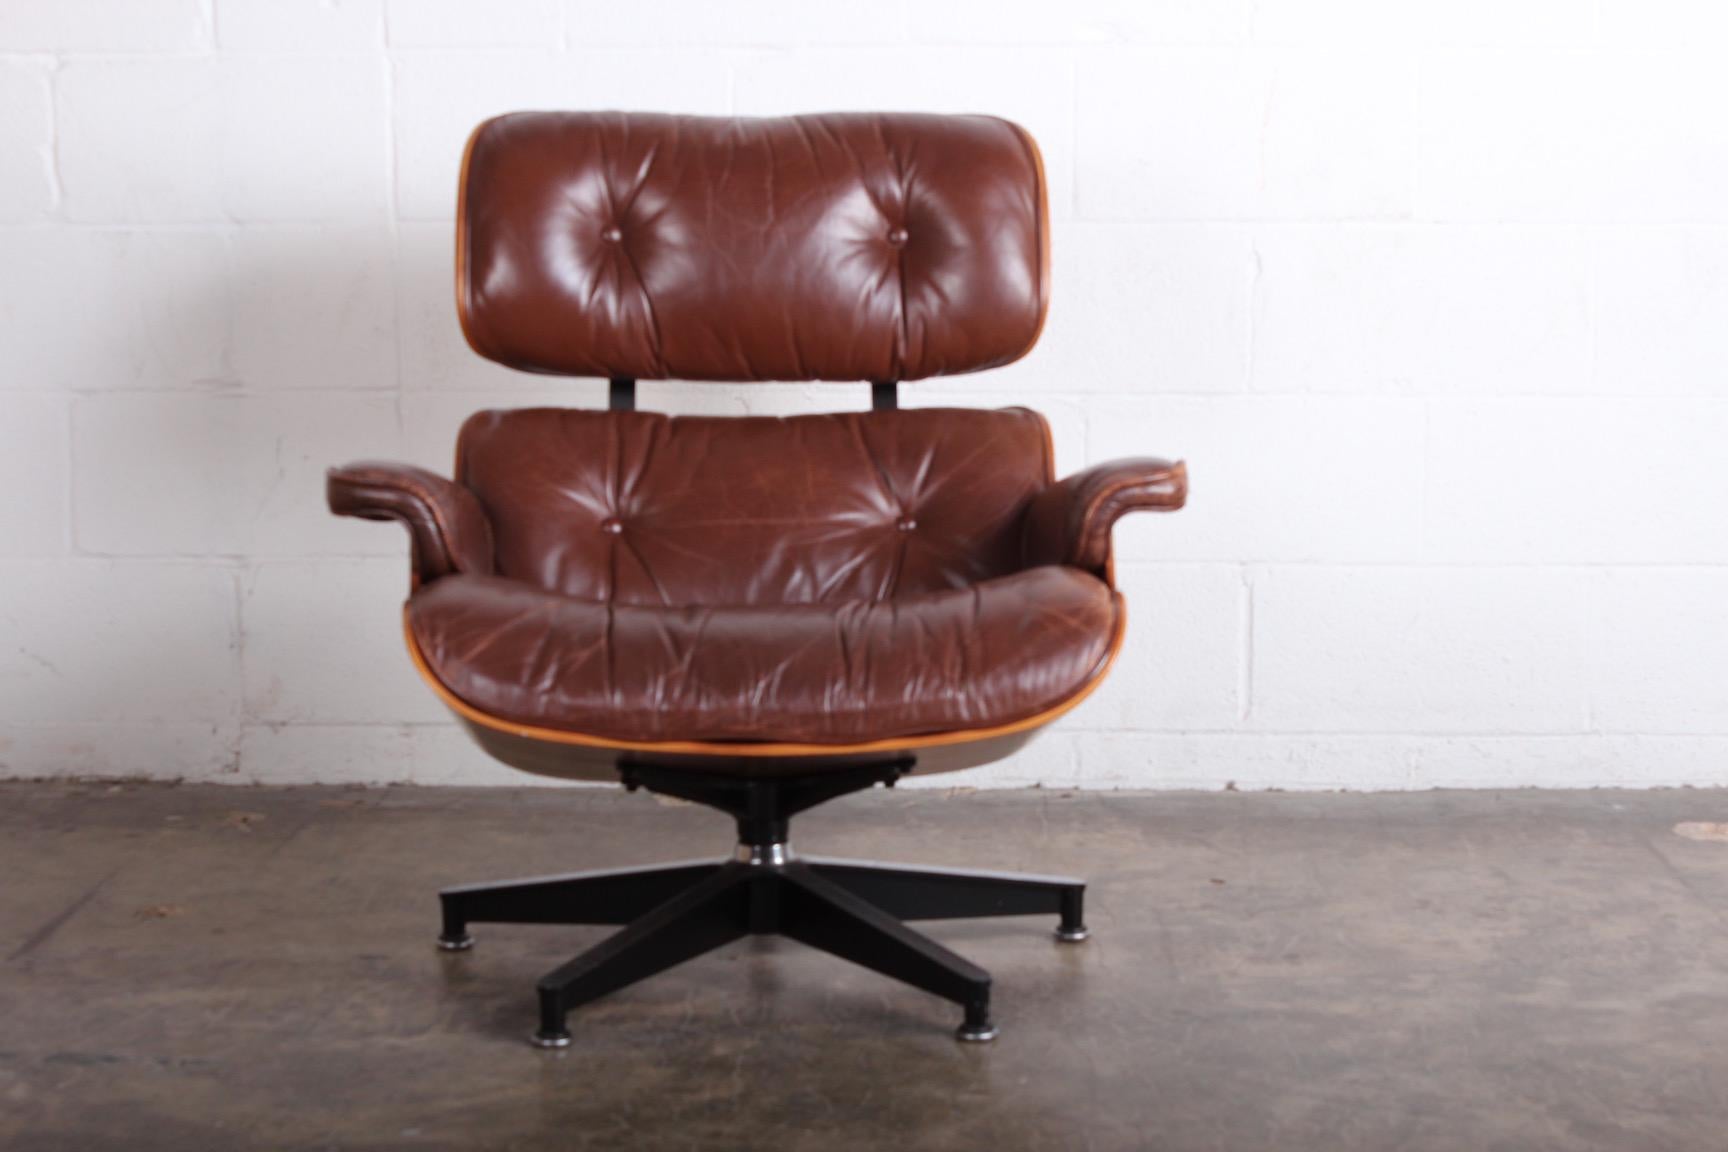 A beautifully grained rosewood 670 lounge chair with original patinated reddish or brown leather.